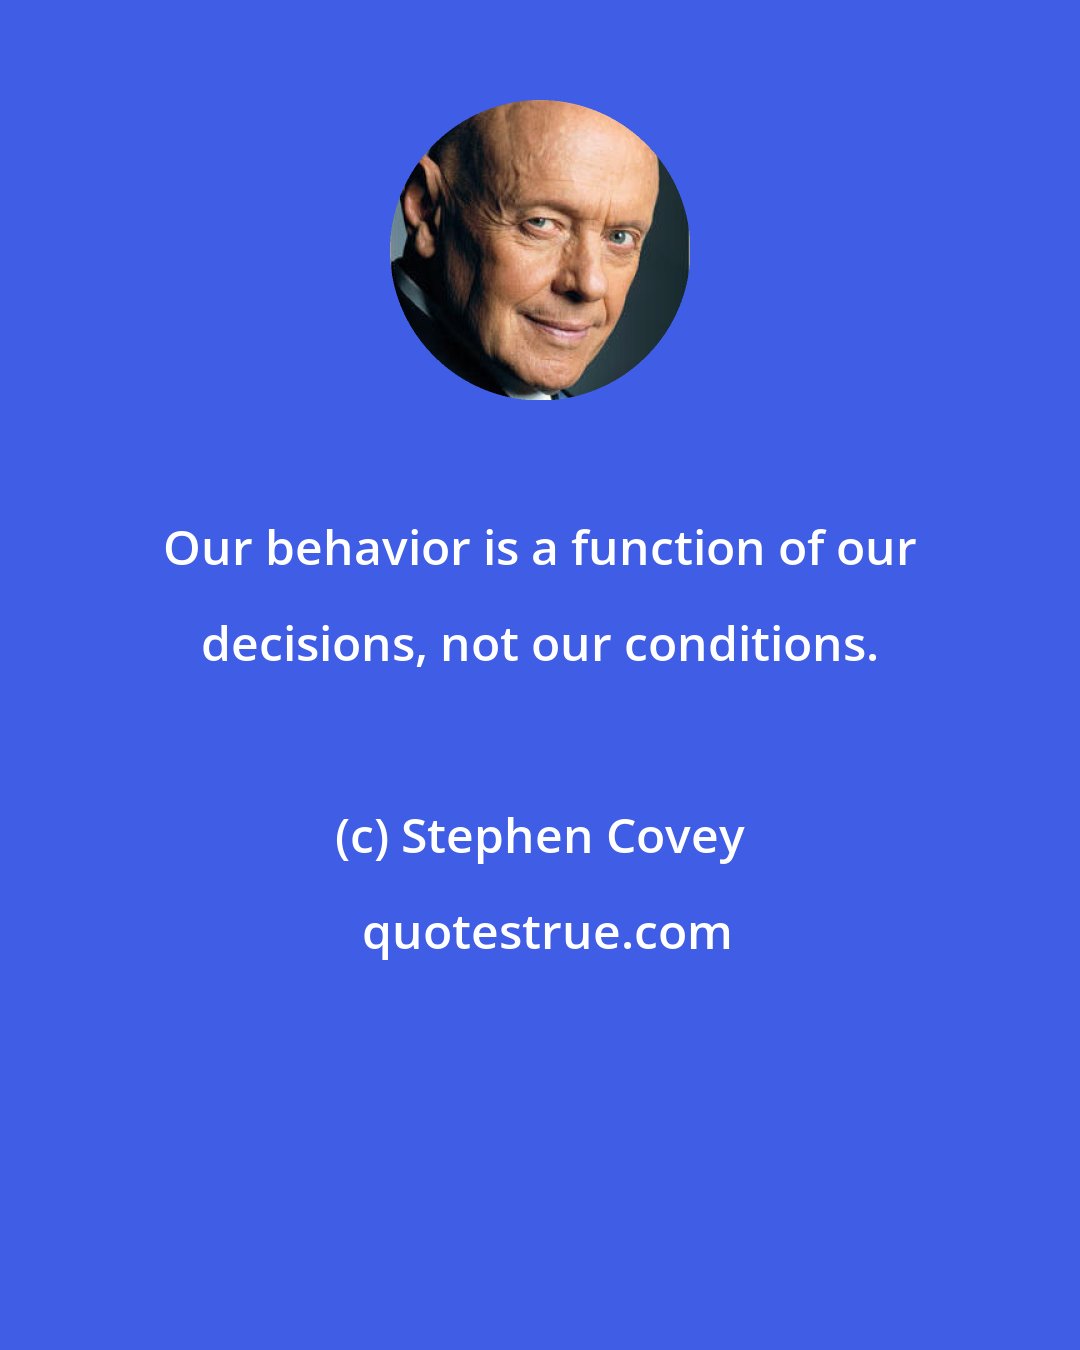 Stephen Covey: Our behavior is a function of our decisions, not our conditions.